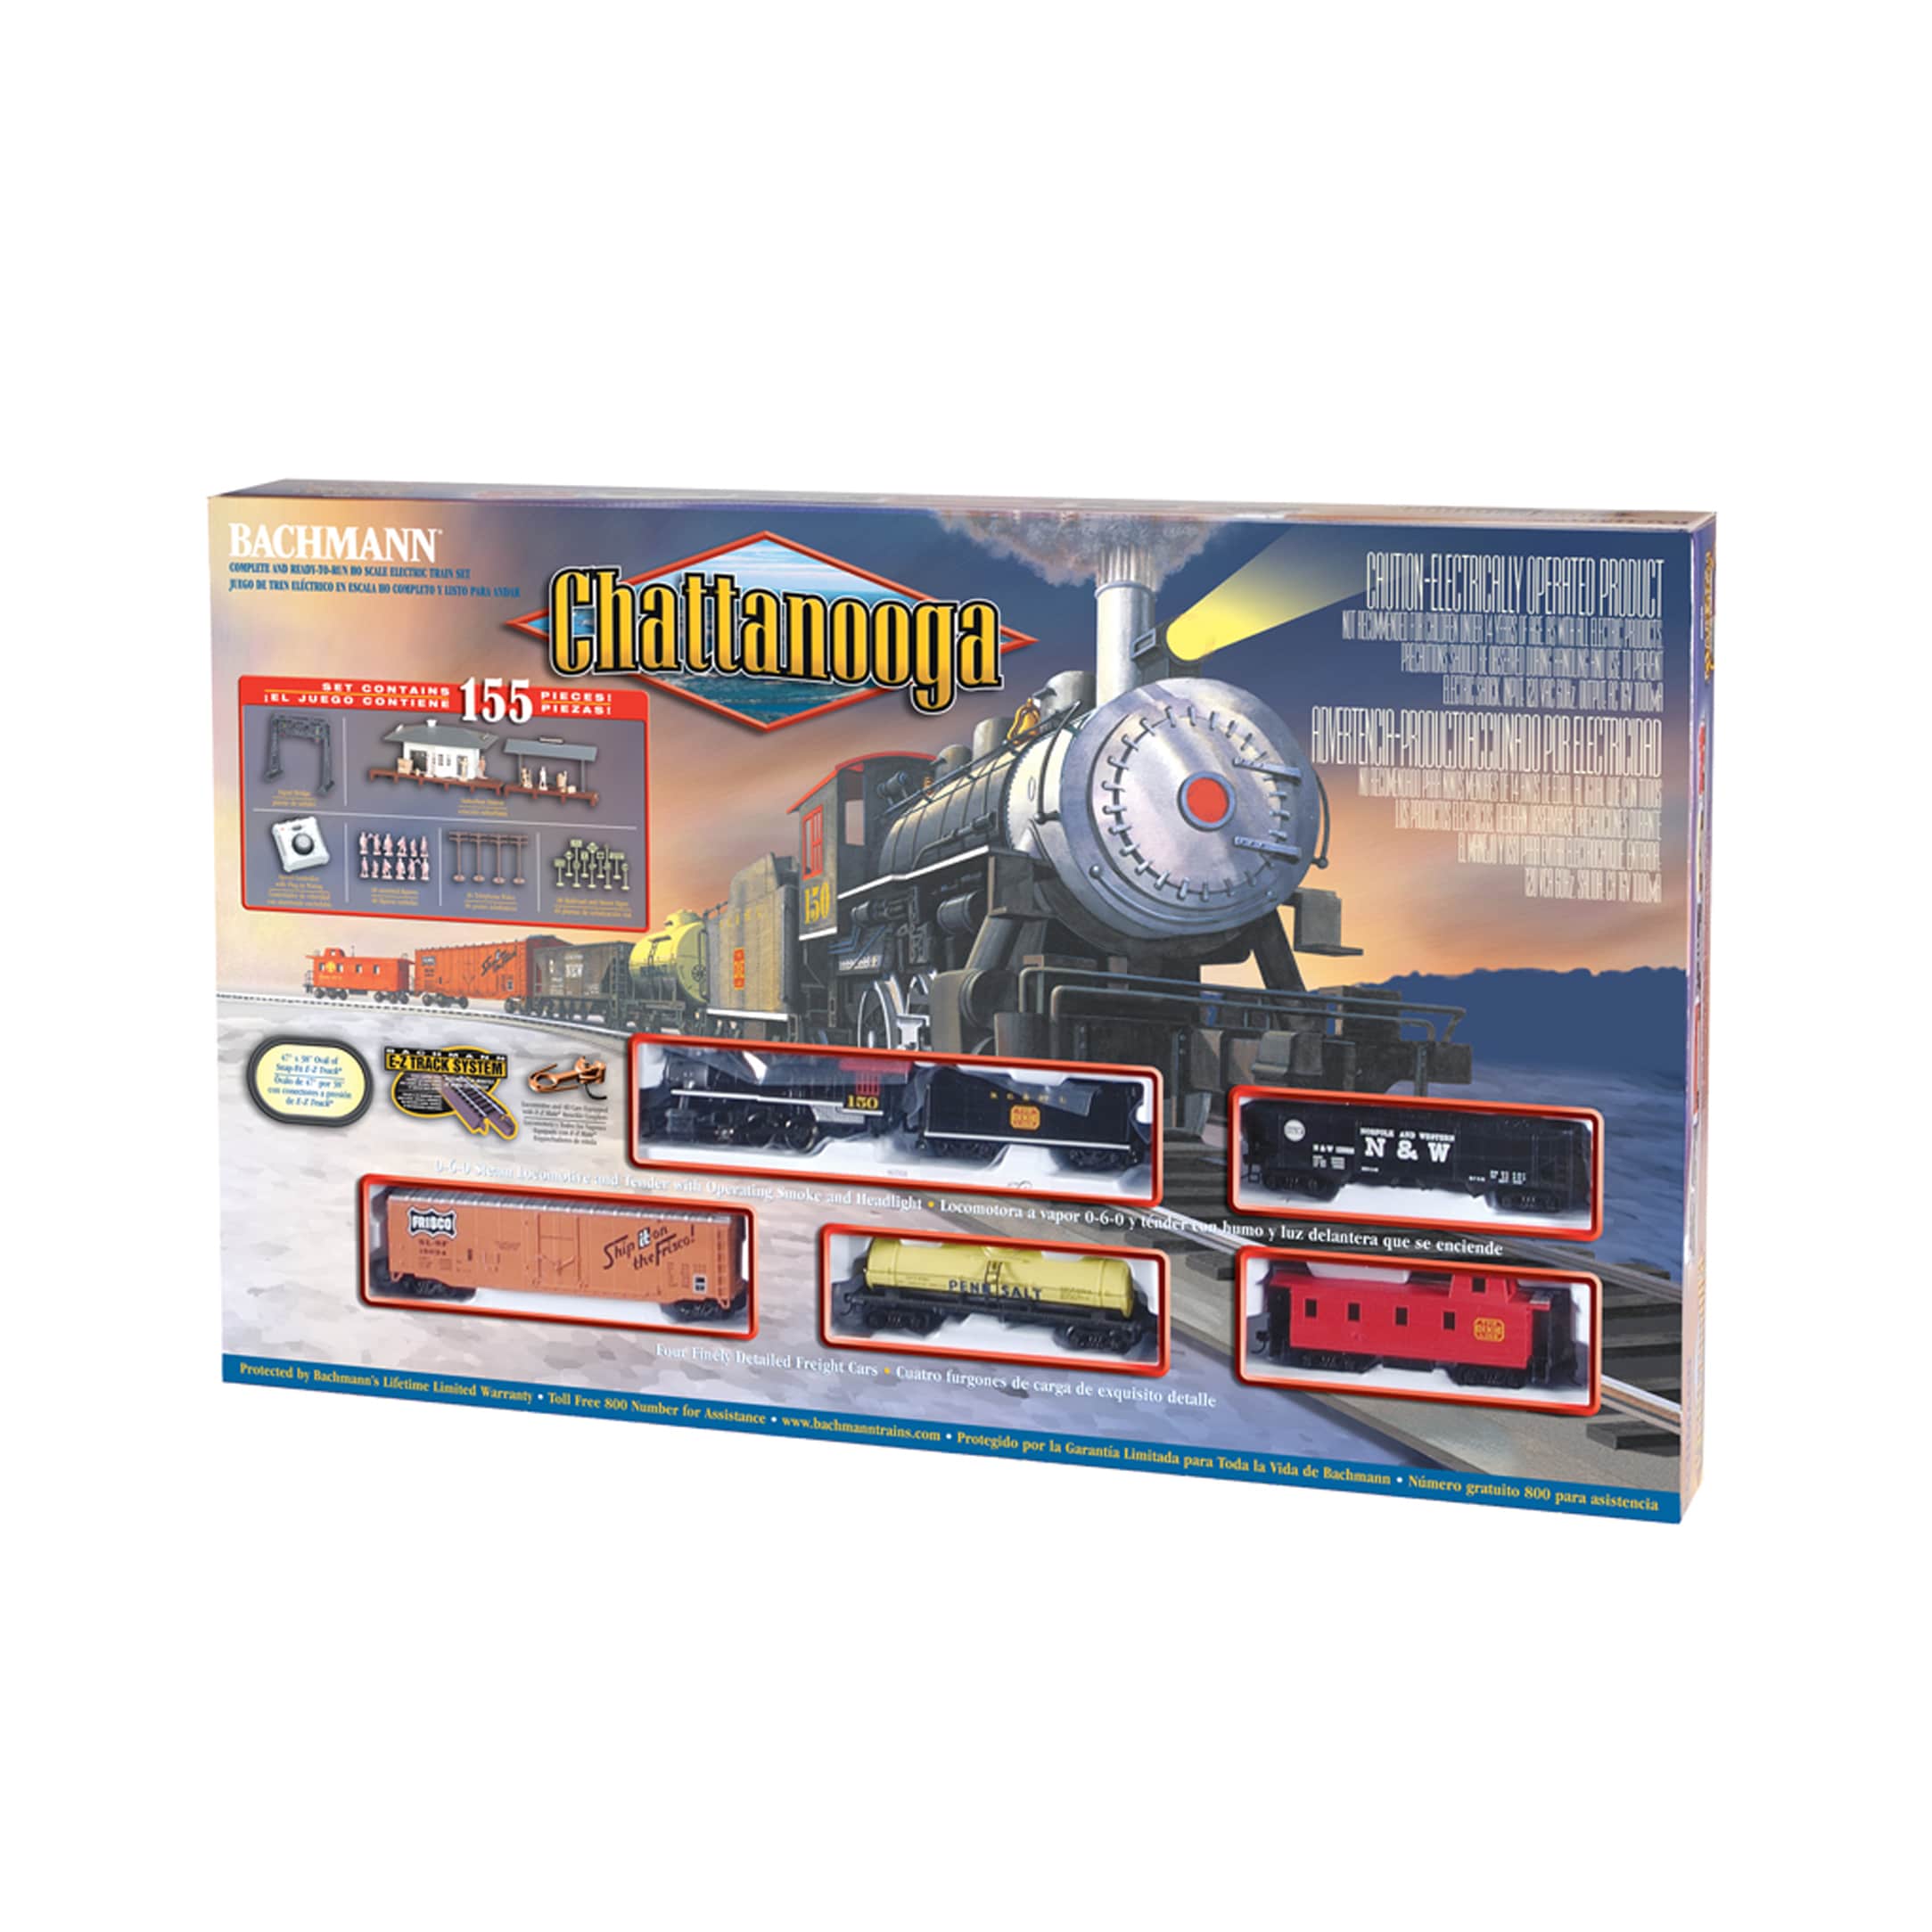  Trains Today I Am Unboxing My New Ho Scale Bachmann Whoville Special